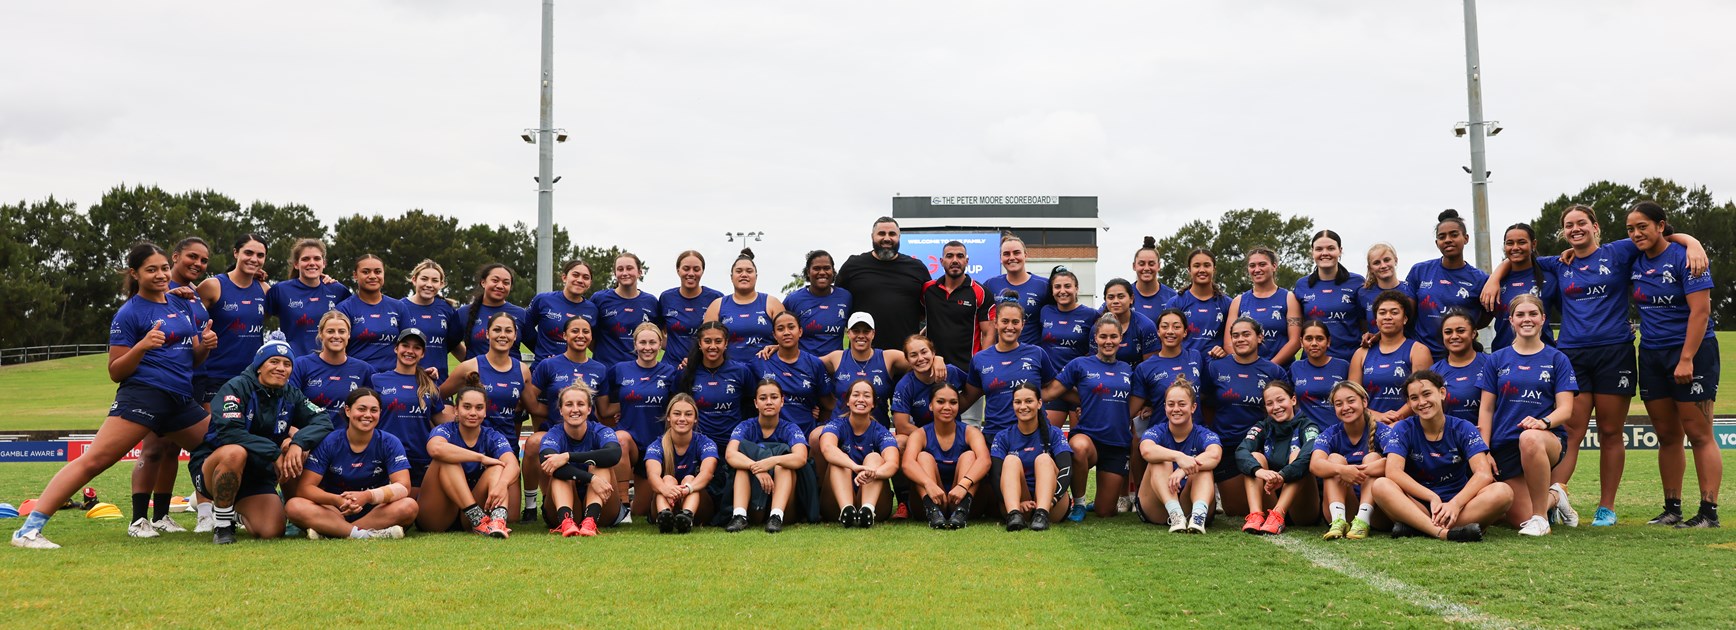 New partners, Vari Group with the Bulldogs Female Academy Sides